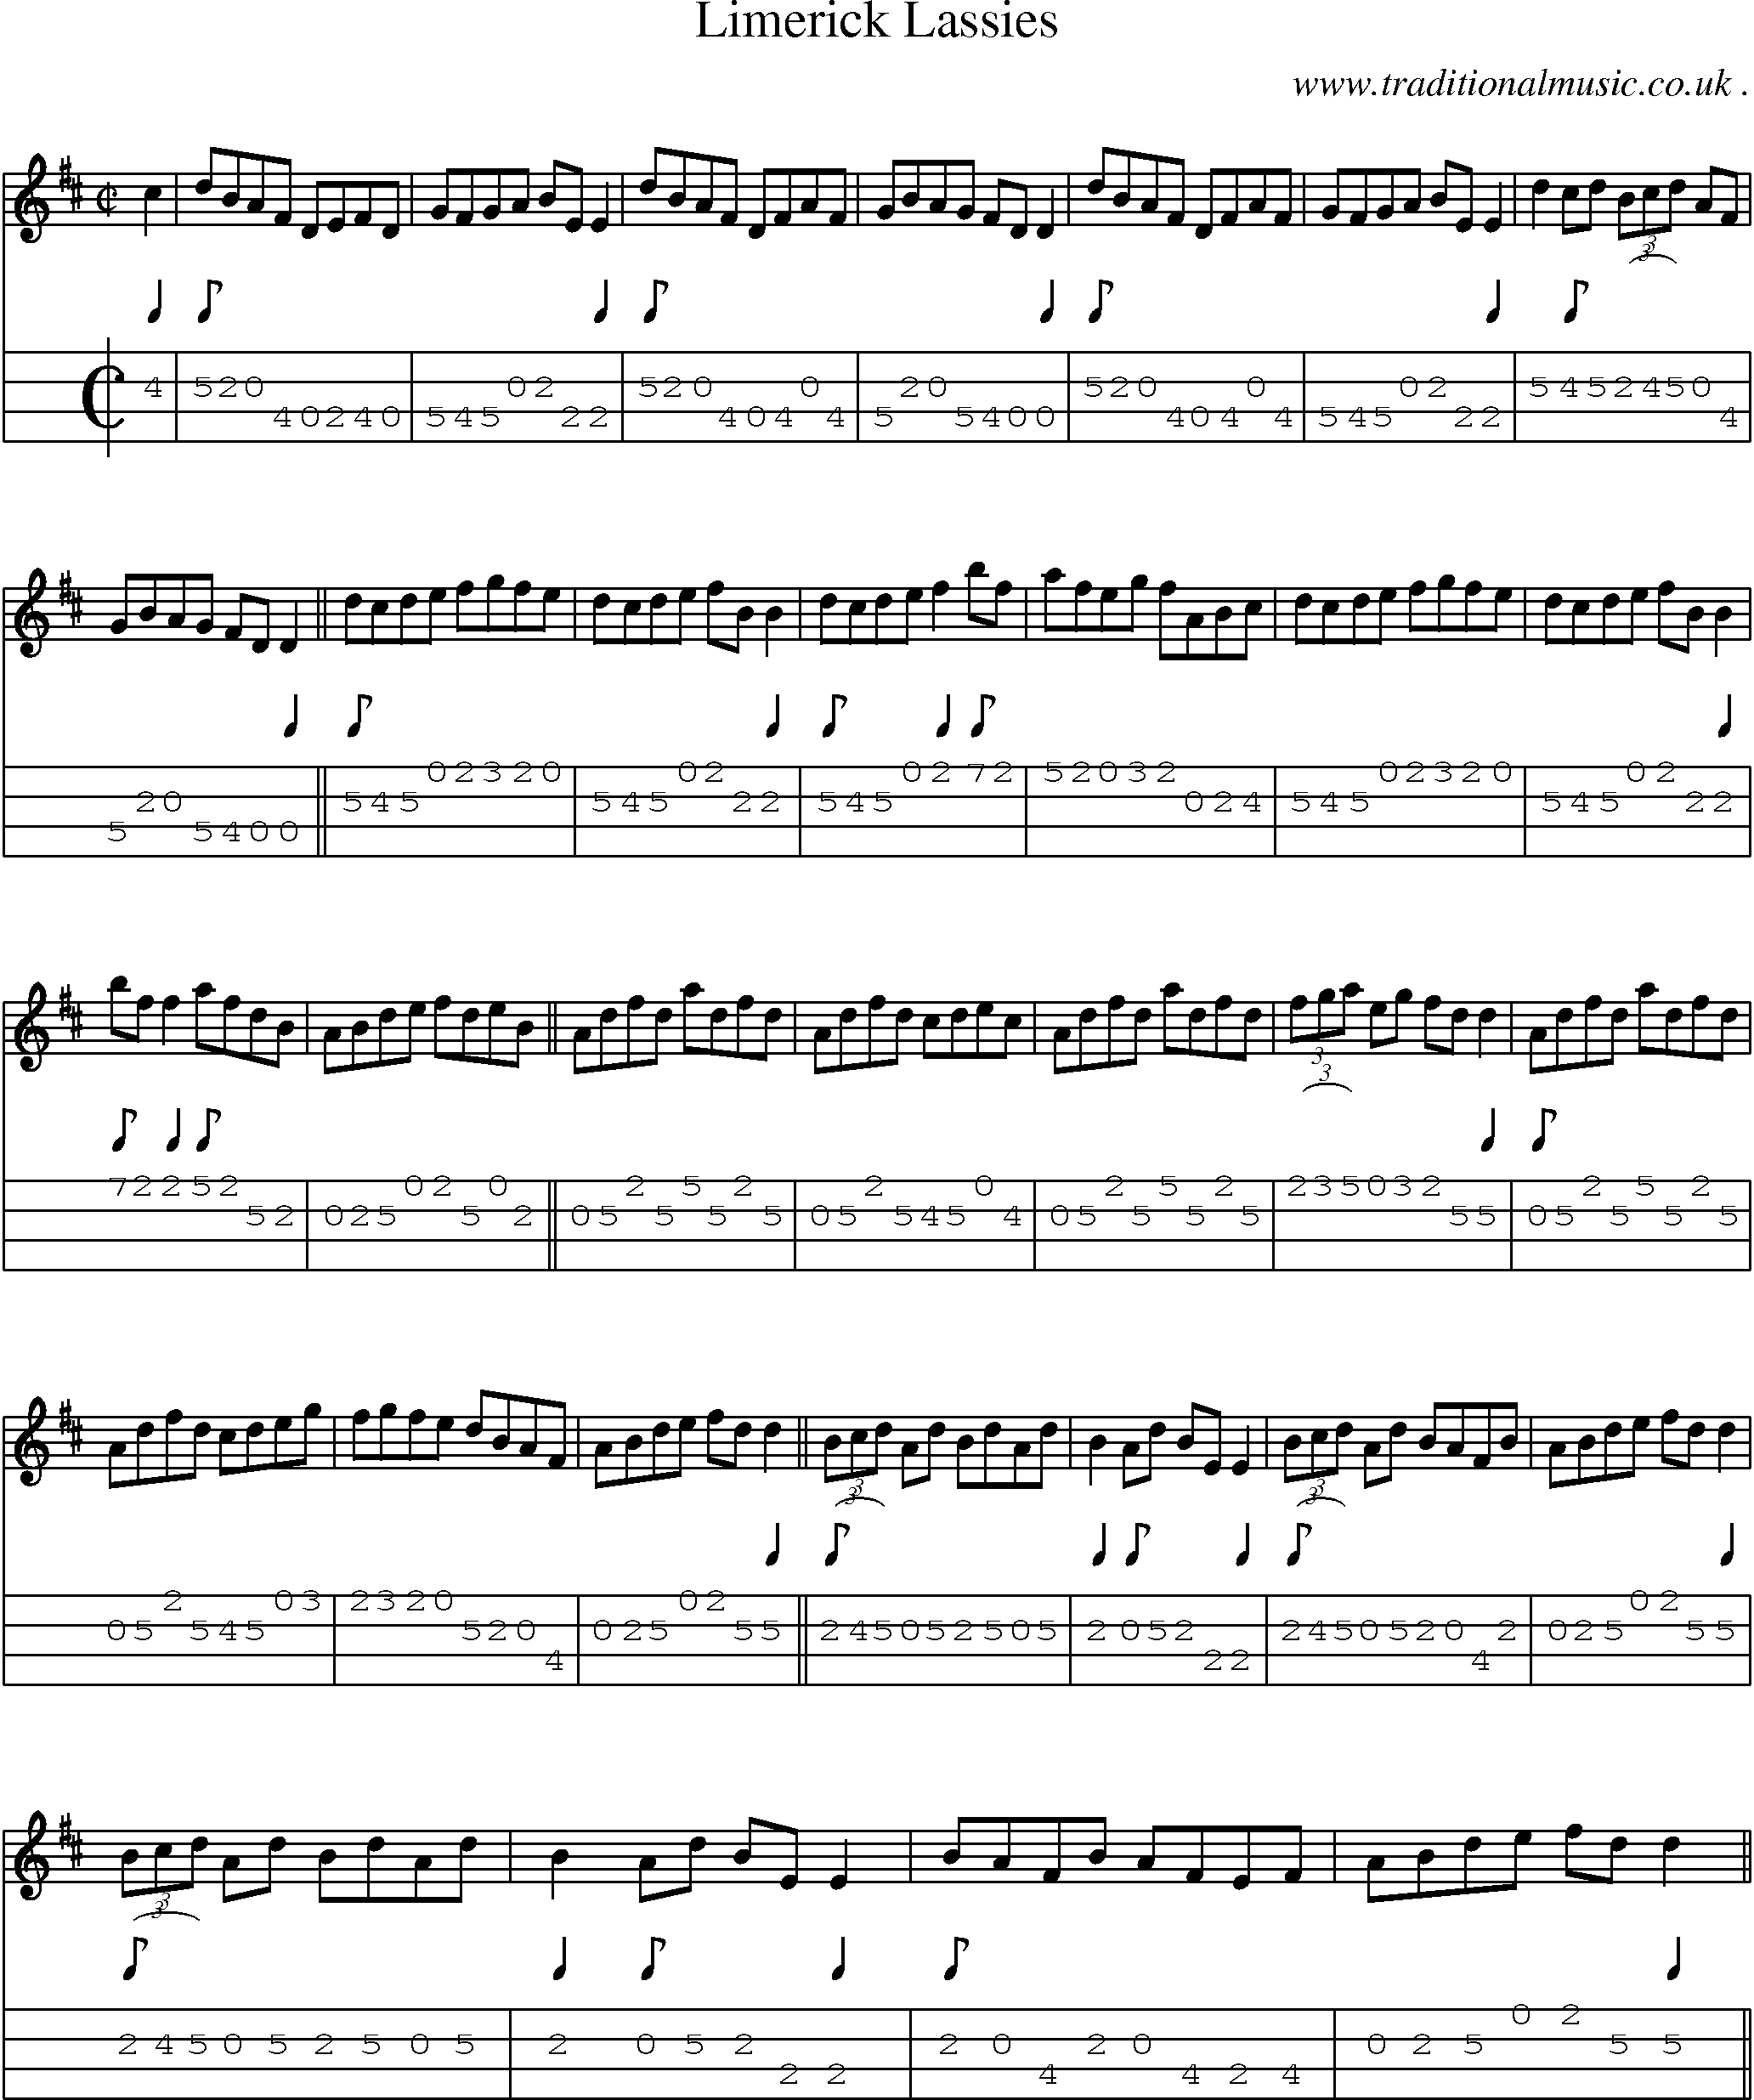 Sheet-Music and Mandolin Tabs for Limerick Lassies